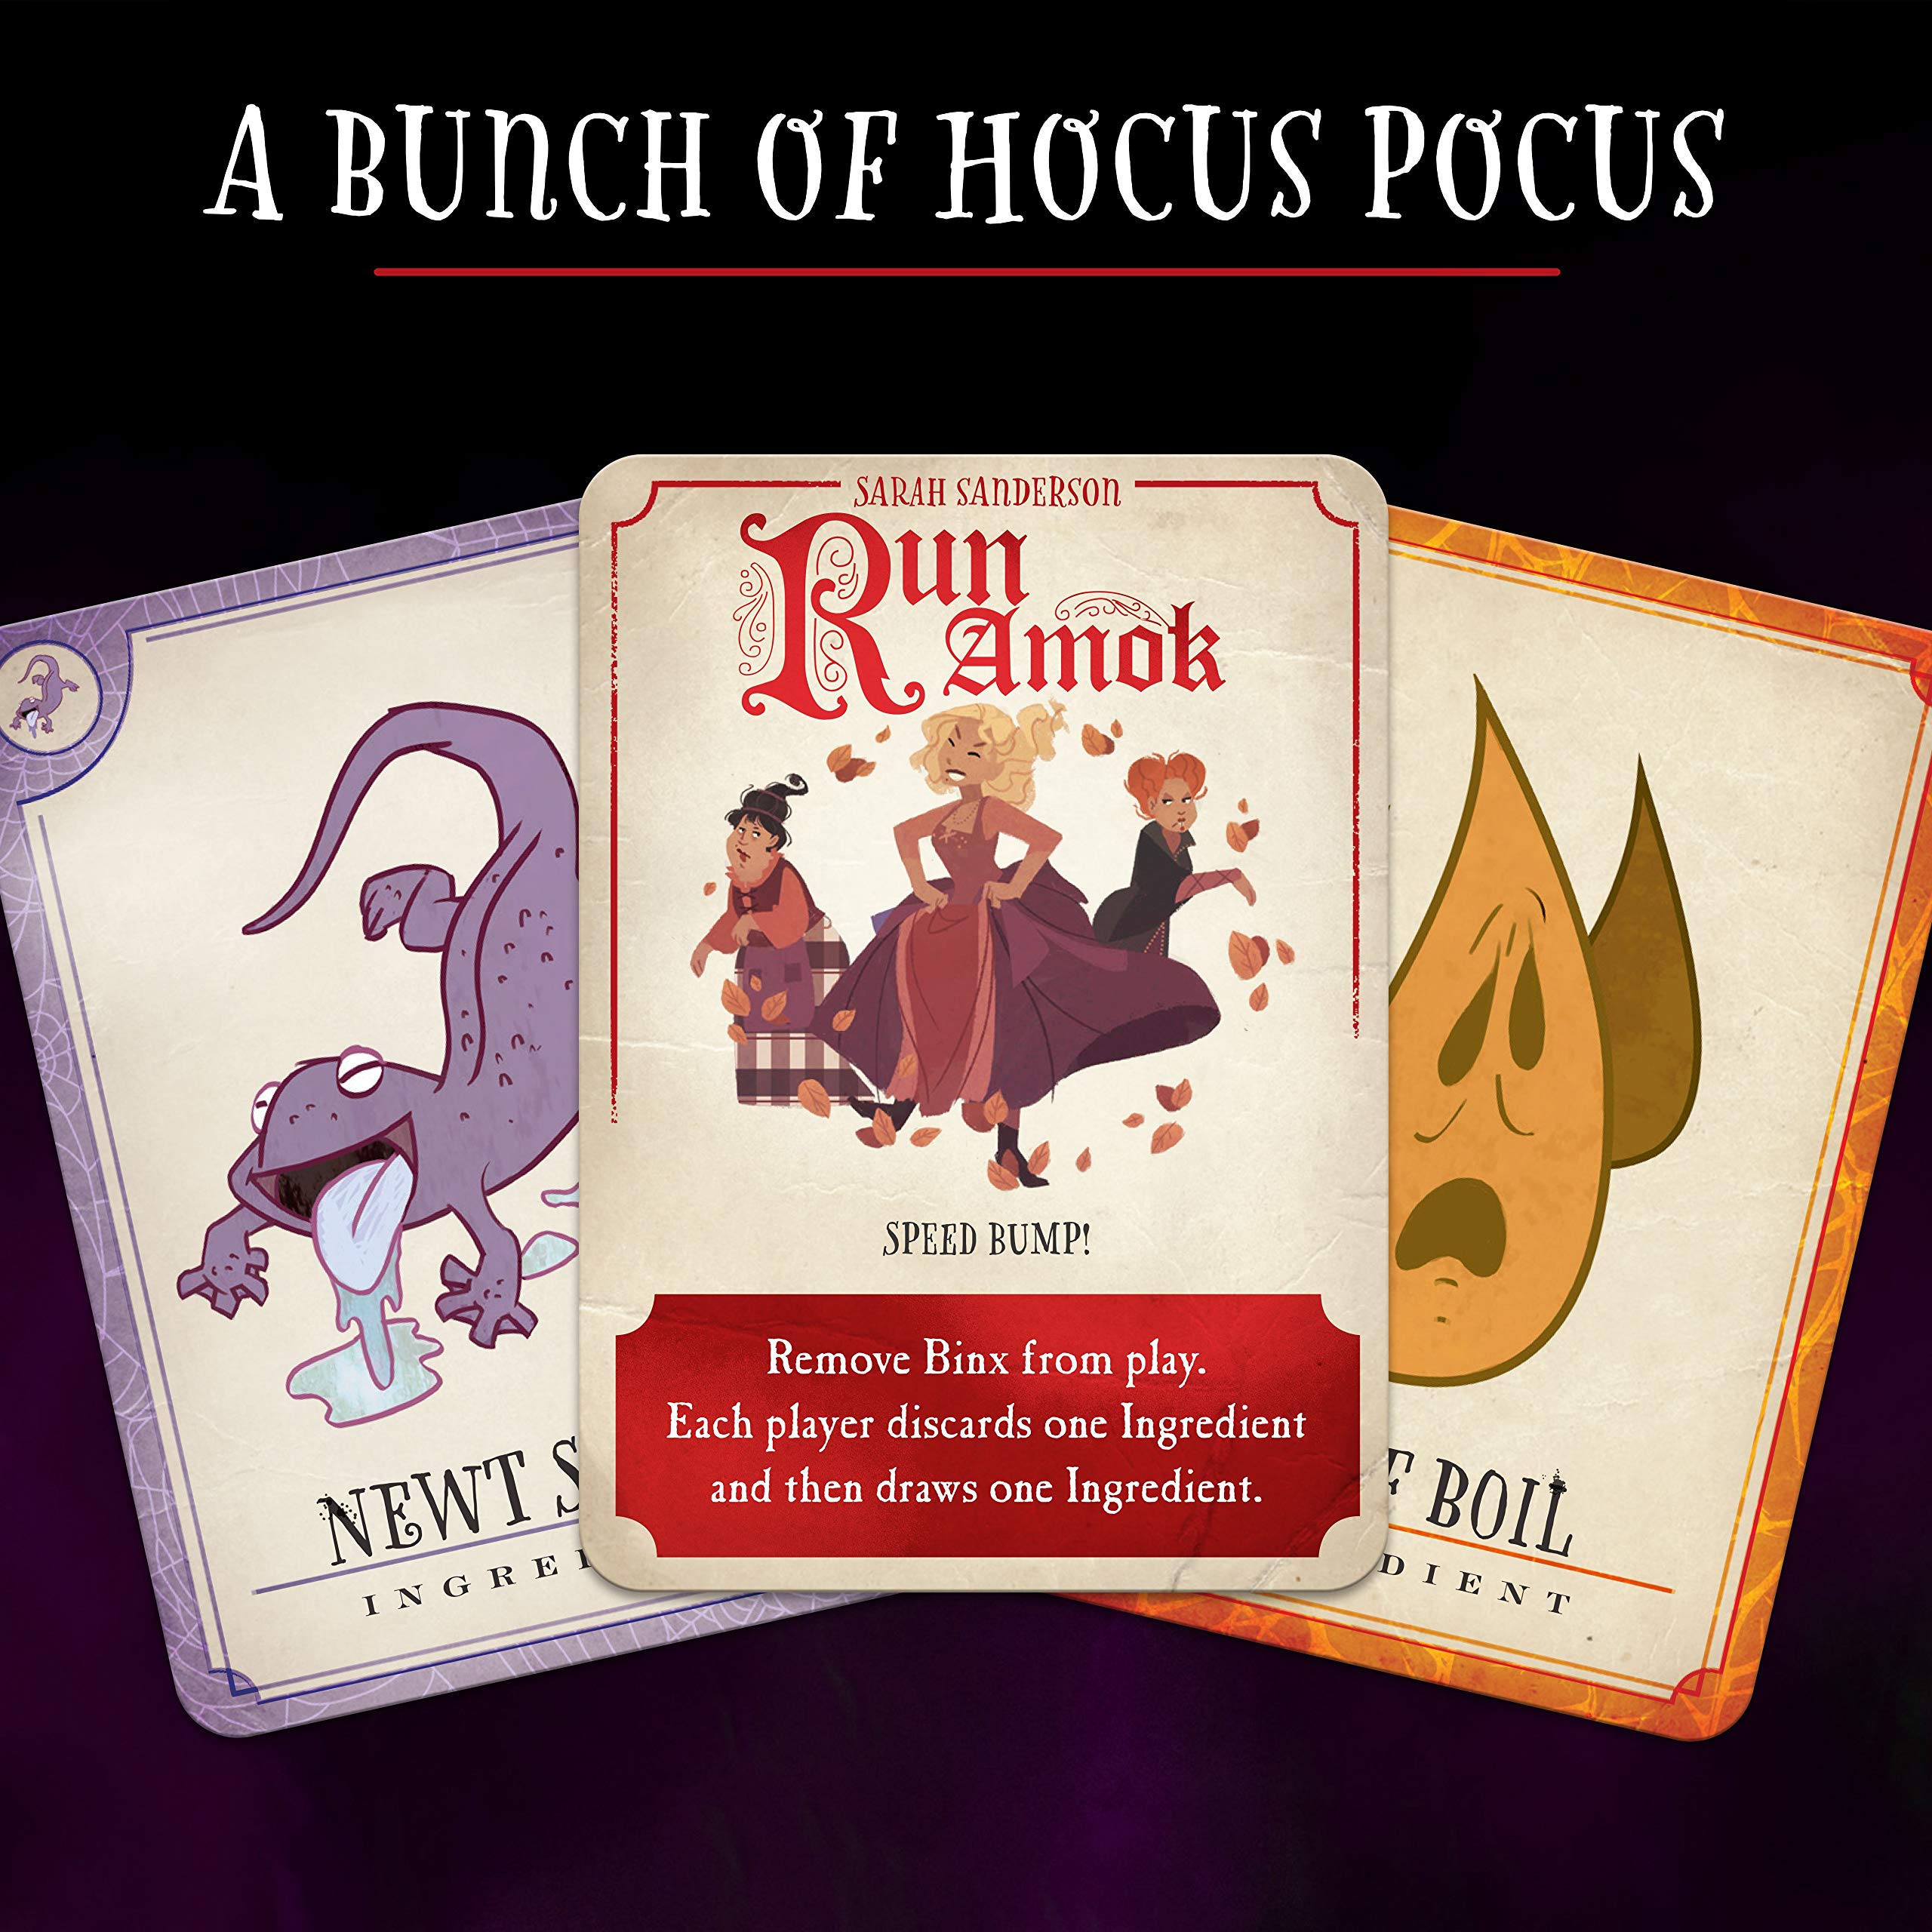 Ravensburger Disney Hocus Pocus: The Game for Ages 8 an Up - A Cooperative Game of Magic and Mayhem